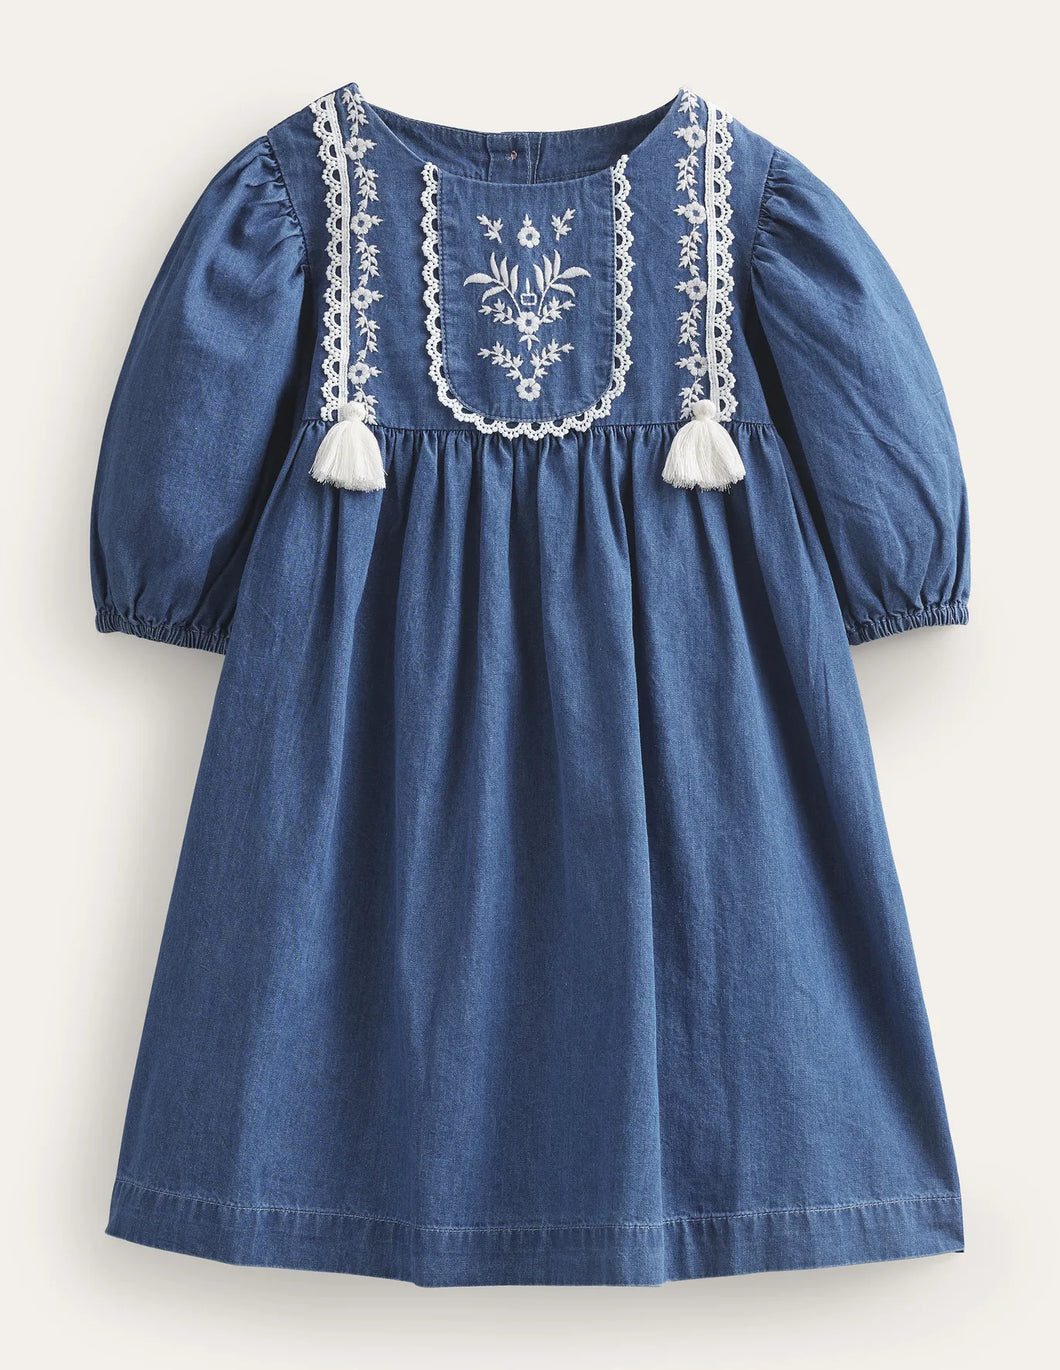 NWT Mini Boden Embroidered Woven Dress